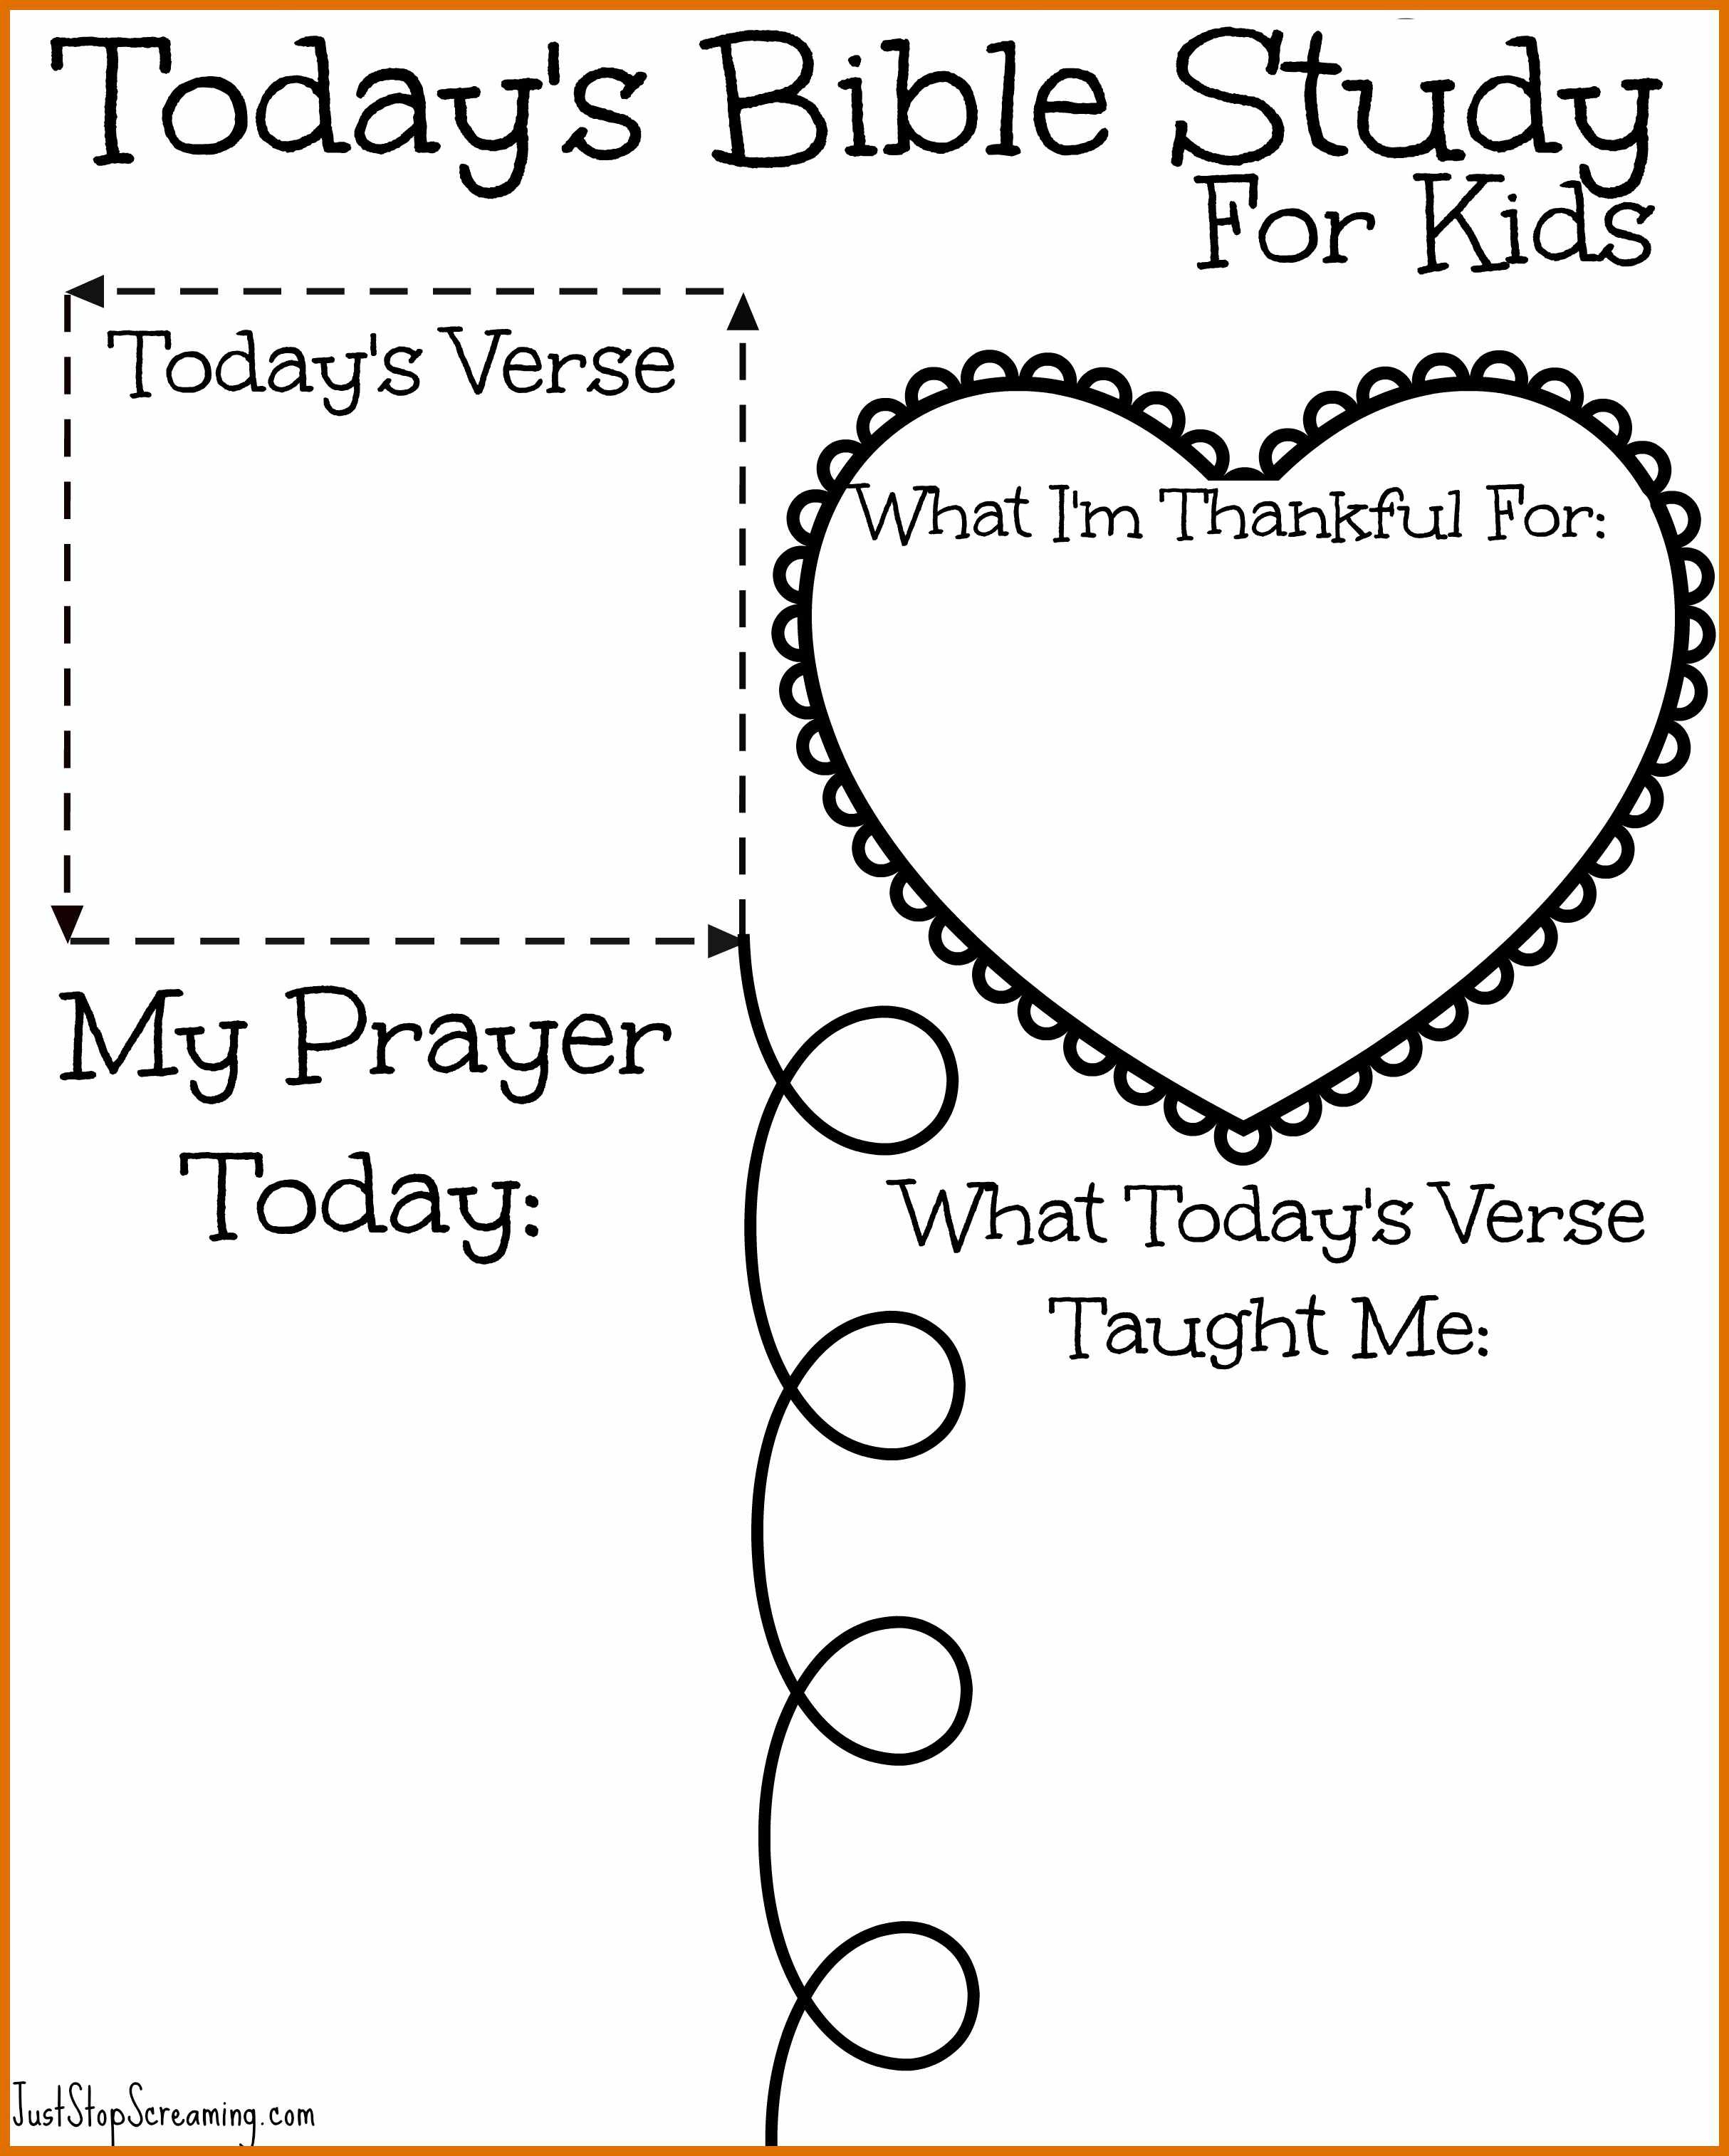 free-printable-bible-study-lessons-for-adults-free-printable